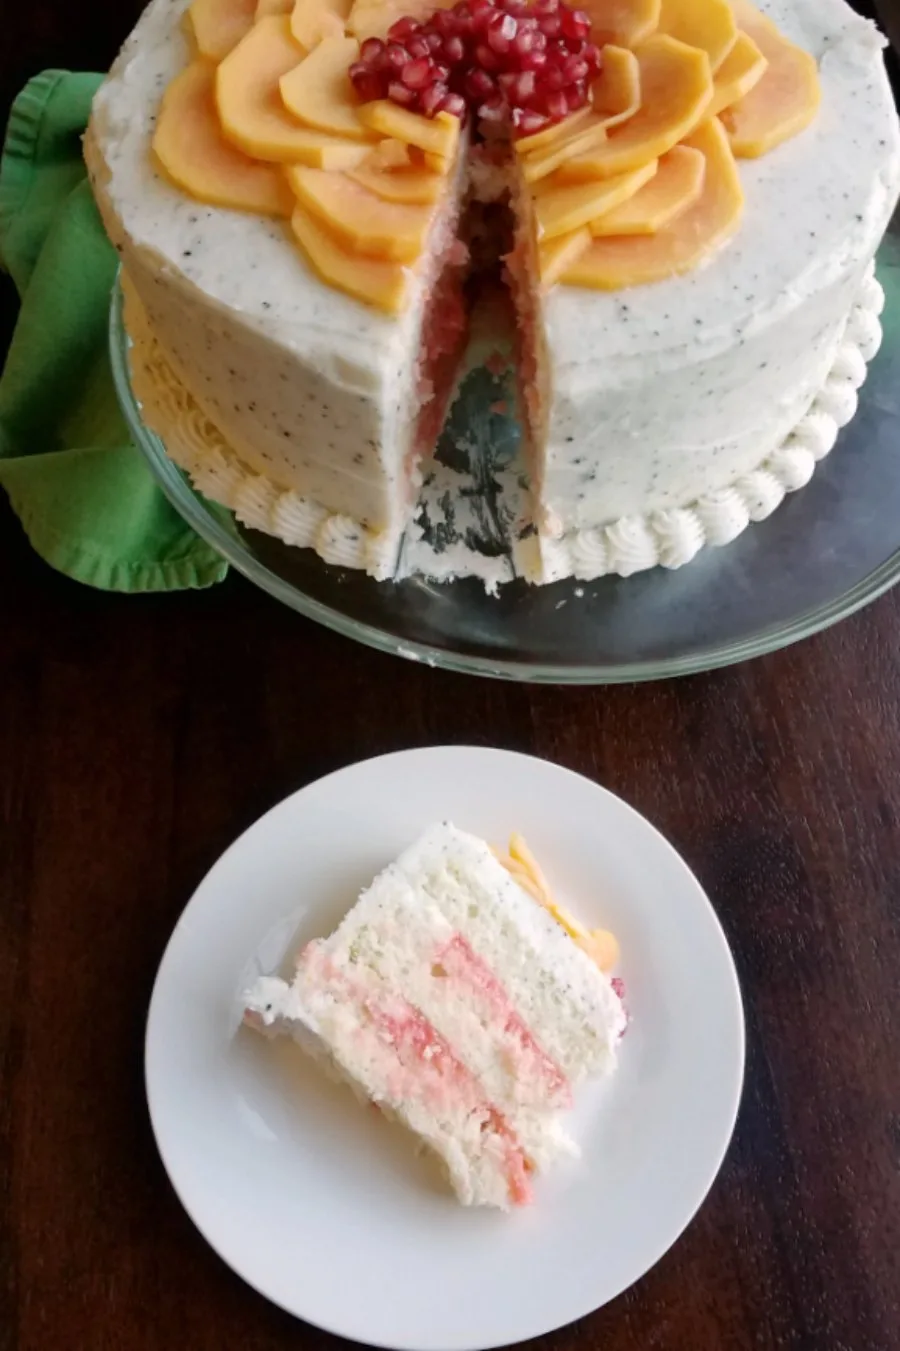 Slice of layered white cake with blood orange curd filling, and dragonfruit buttercream on plate, ready to eat, with remaining cake in the background.